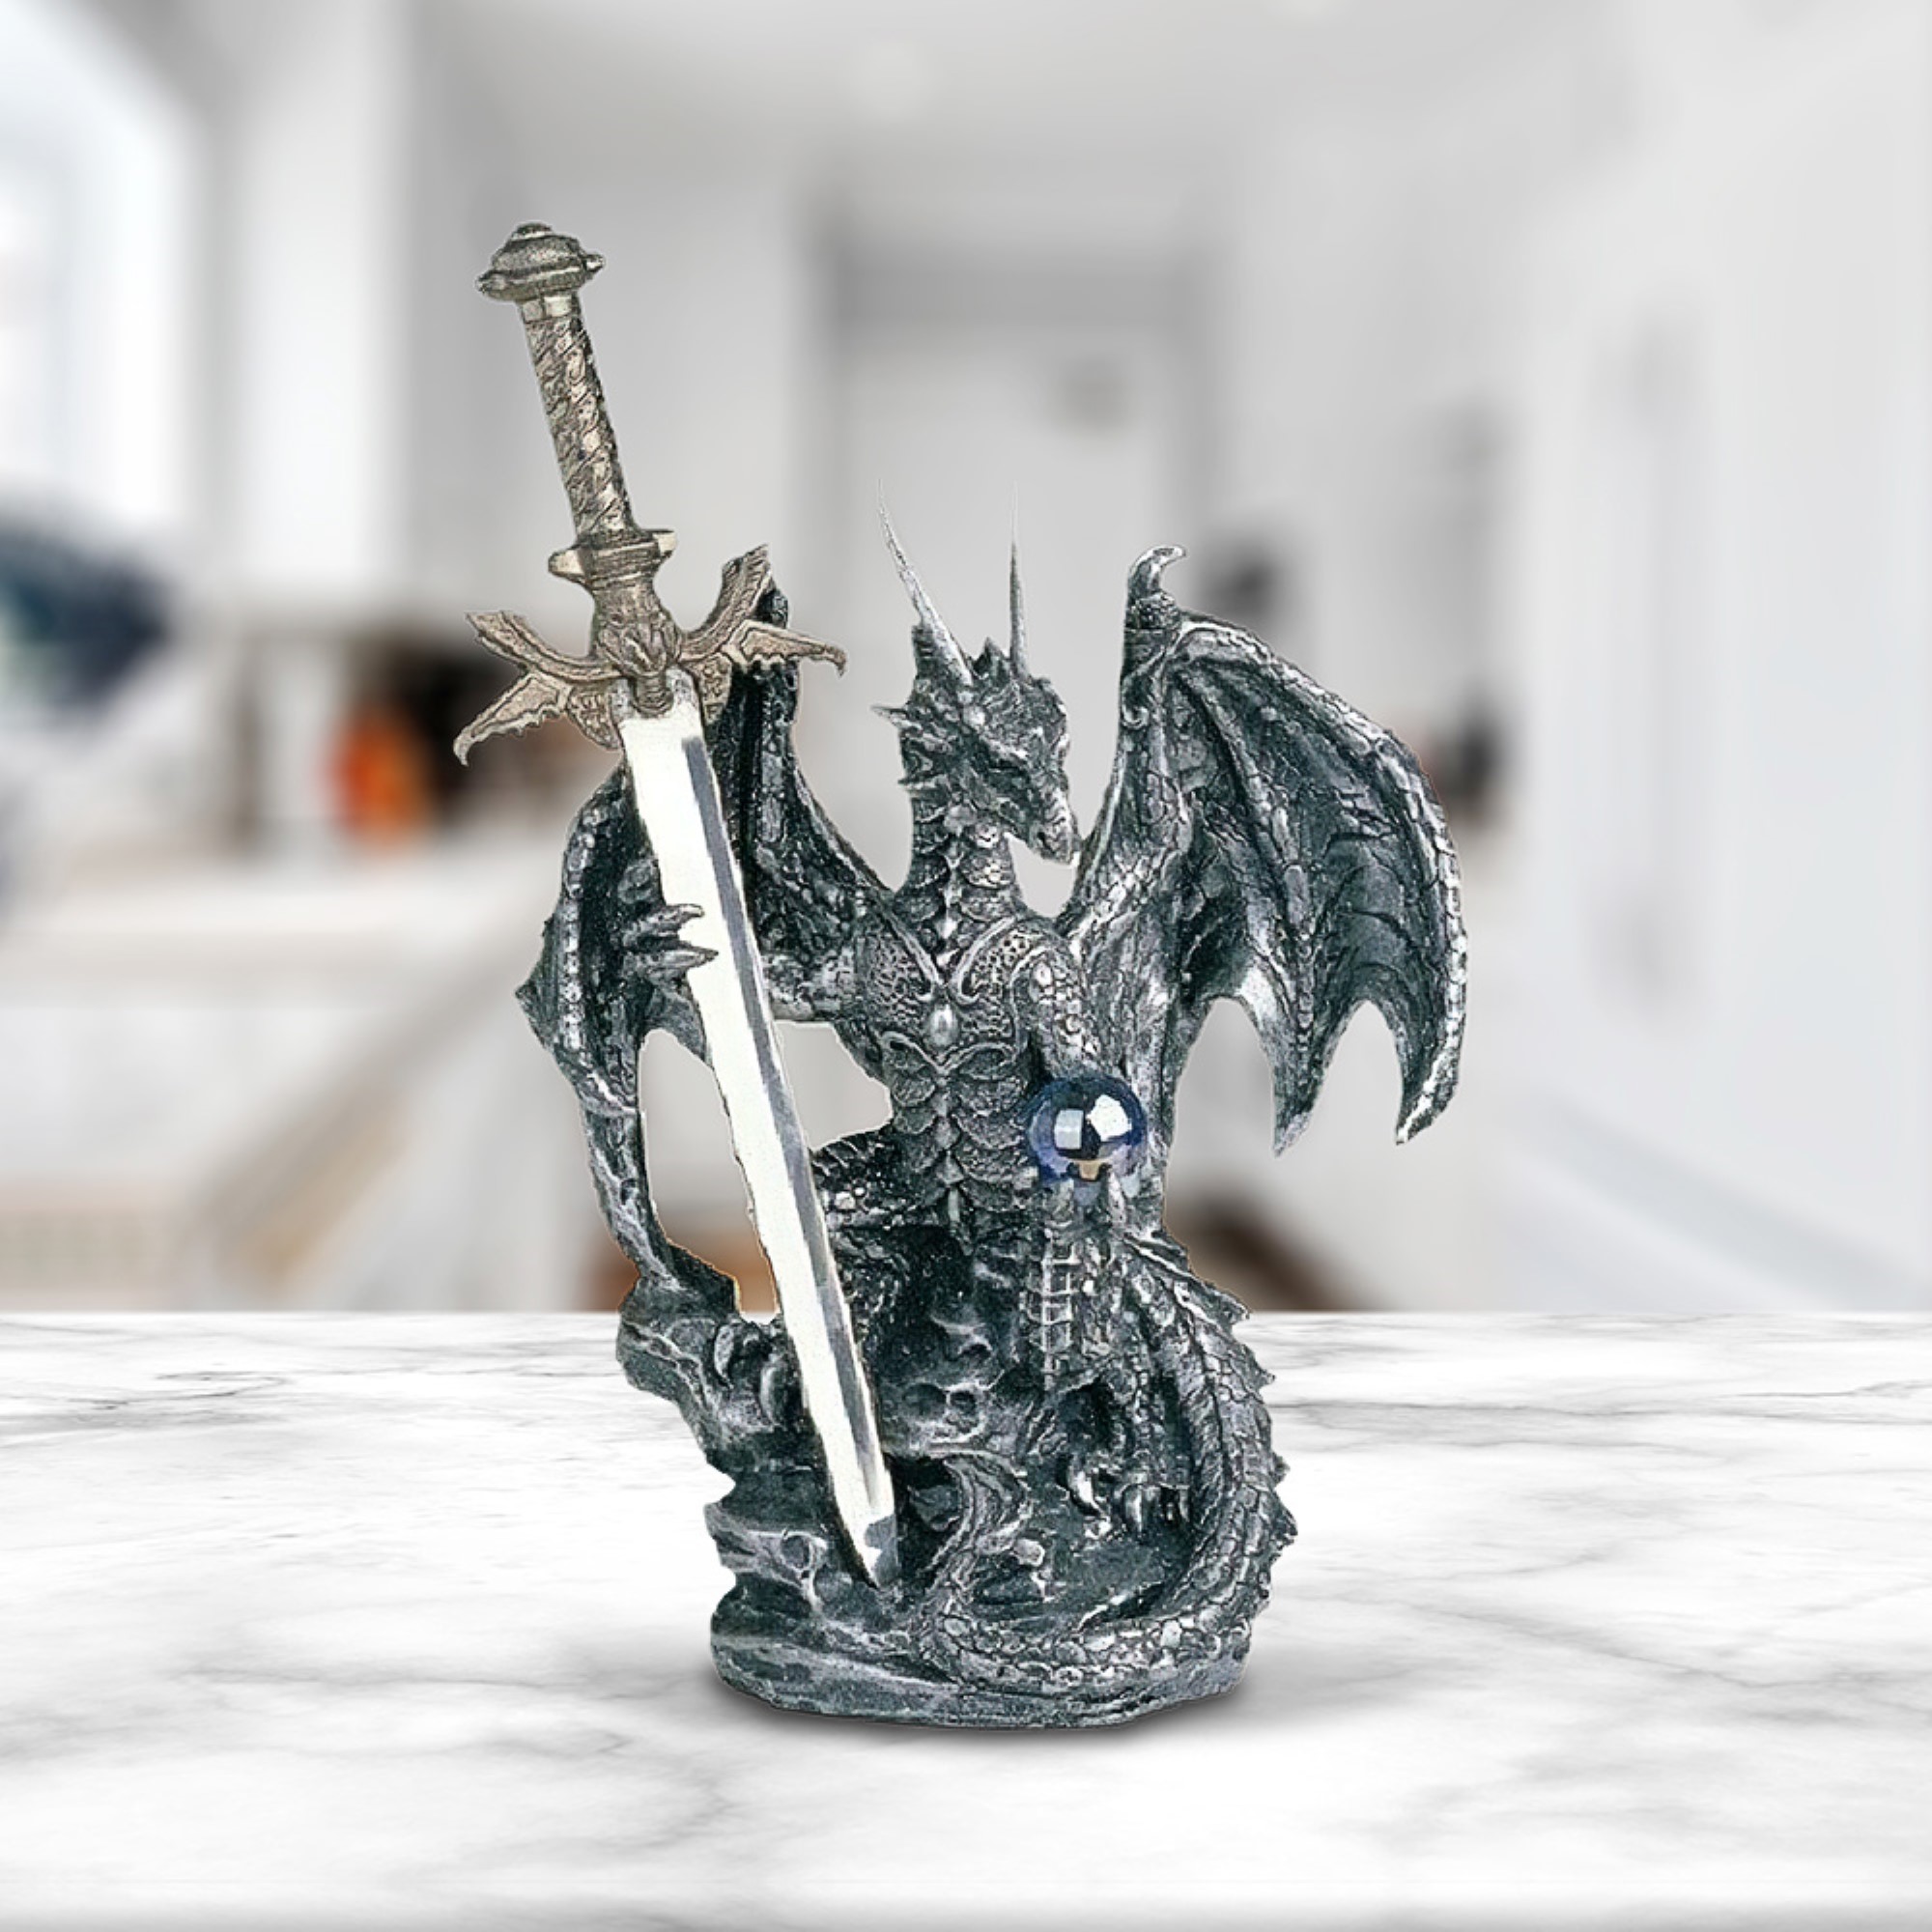 

5"h Medieval Silver Dragon Holding Blue Gemstone And Sword Guardian Figurine Statue Home/room Decor And Perfect Gift Ideas For House Warming, Holidays And Birthdays Great Collectible Addition